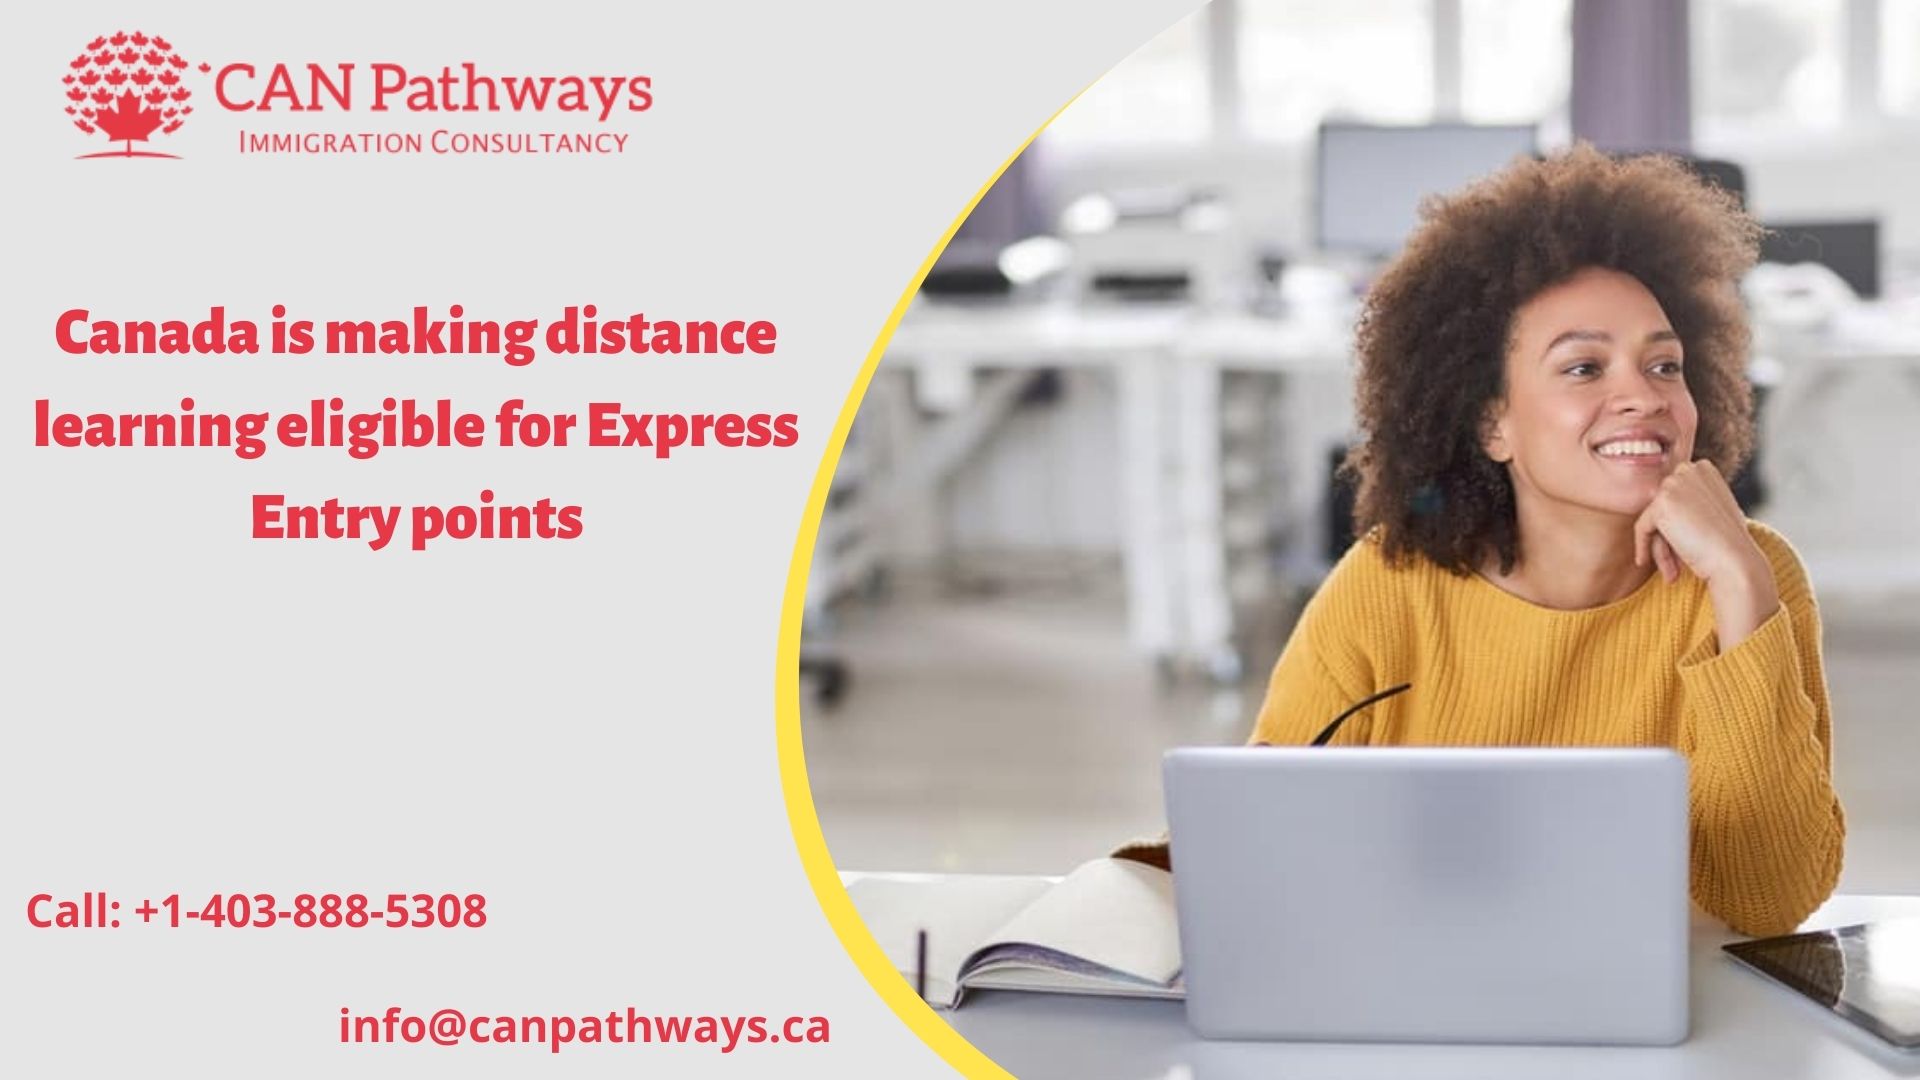 Canada is making distance learning